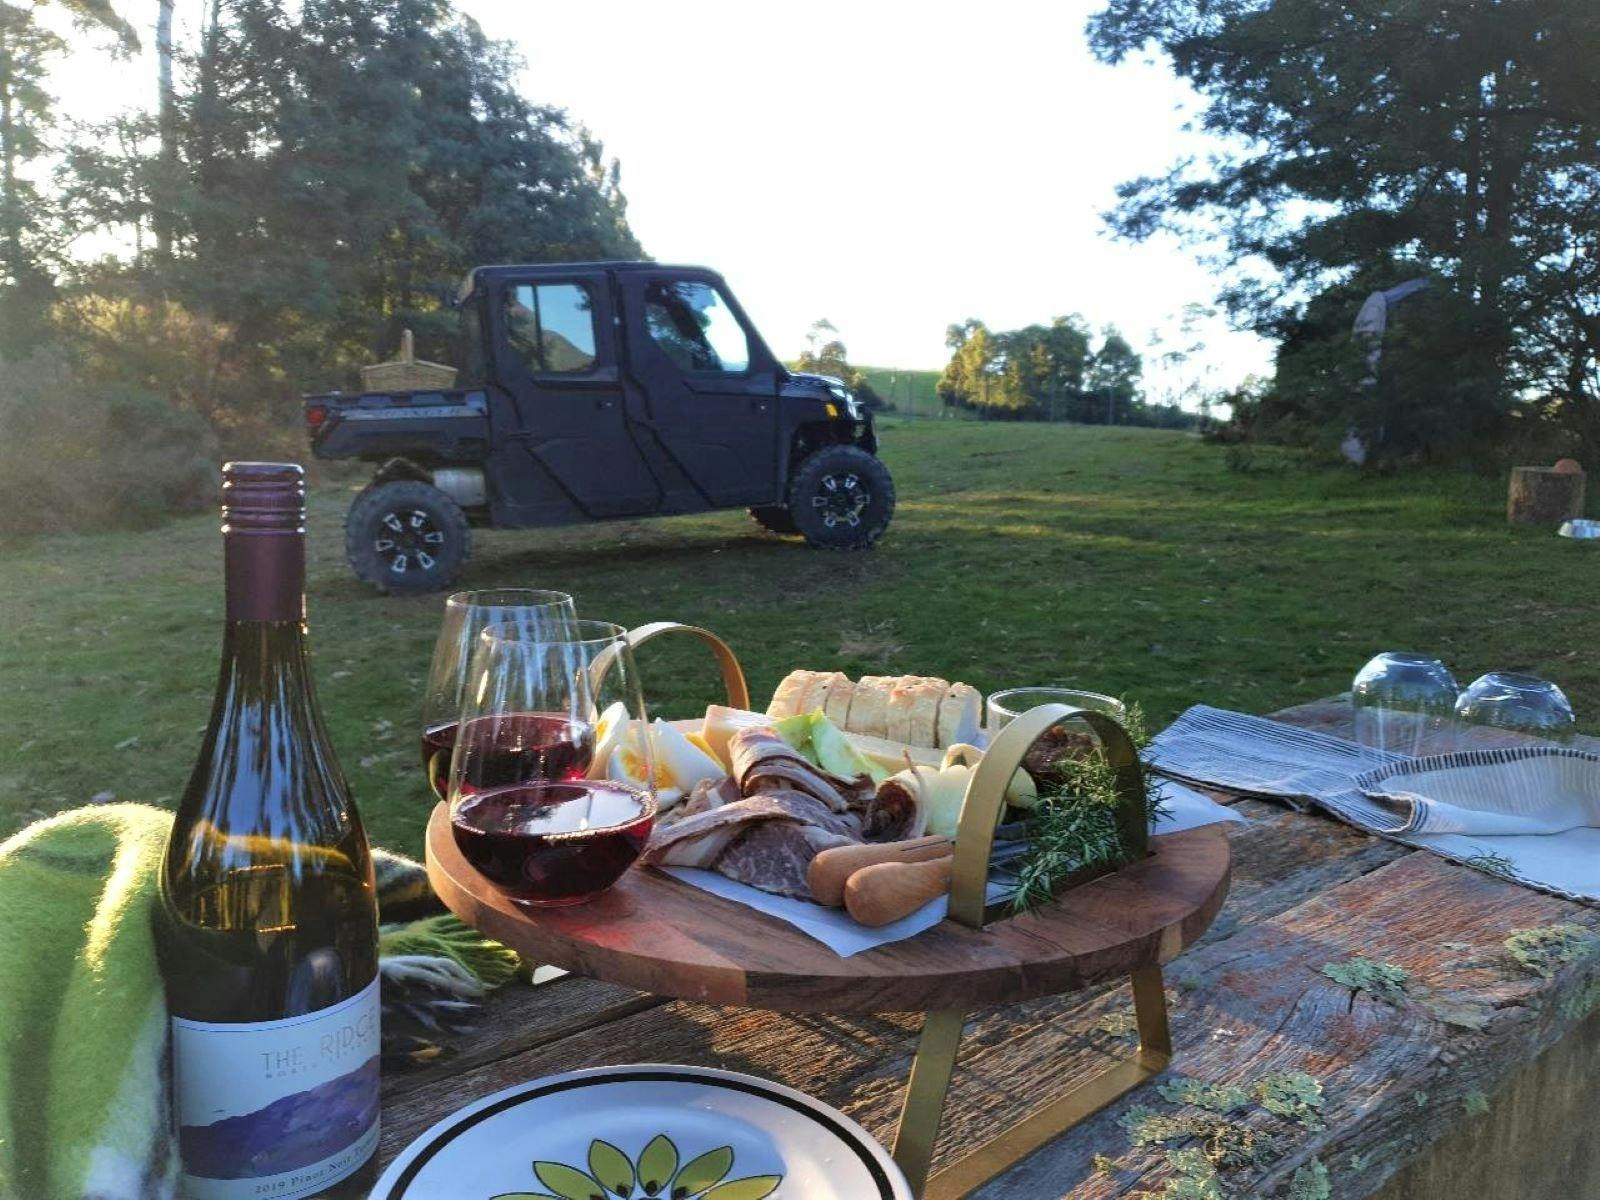 Wine and picnic platter in natural bushland with ATV